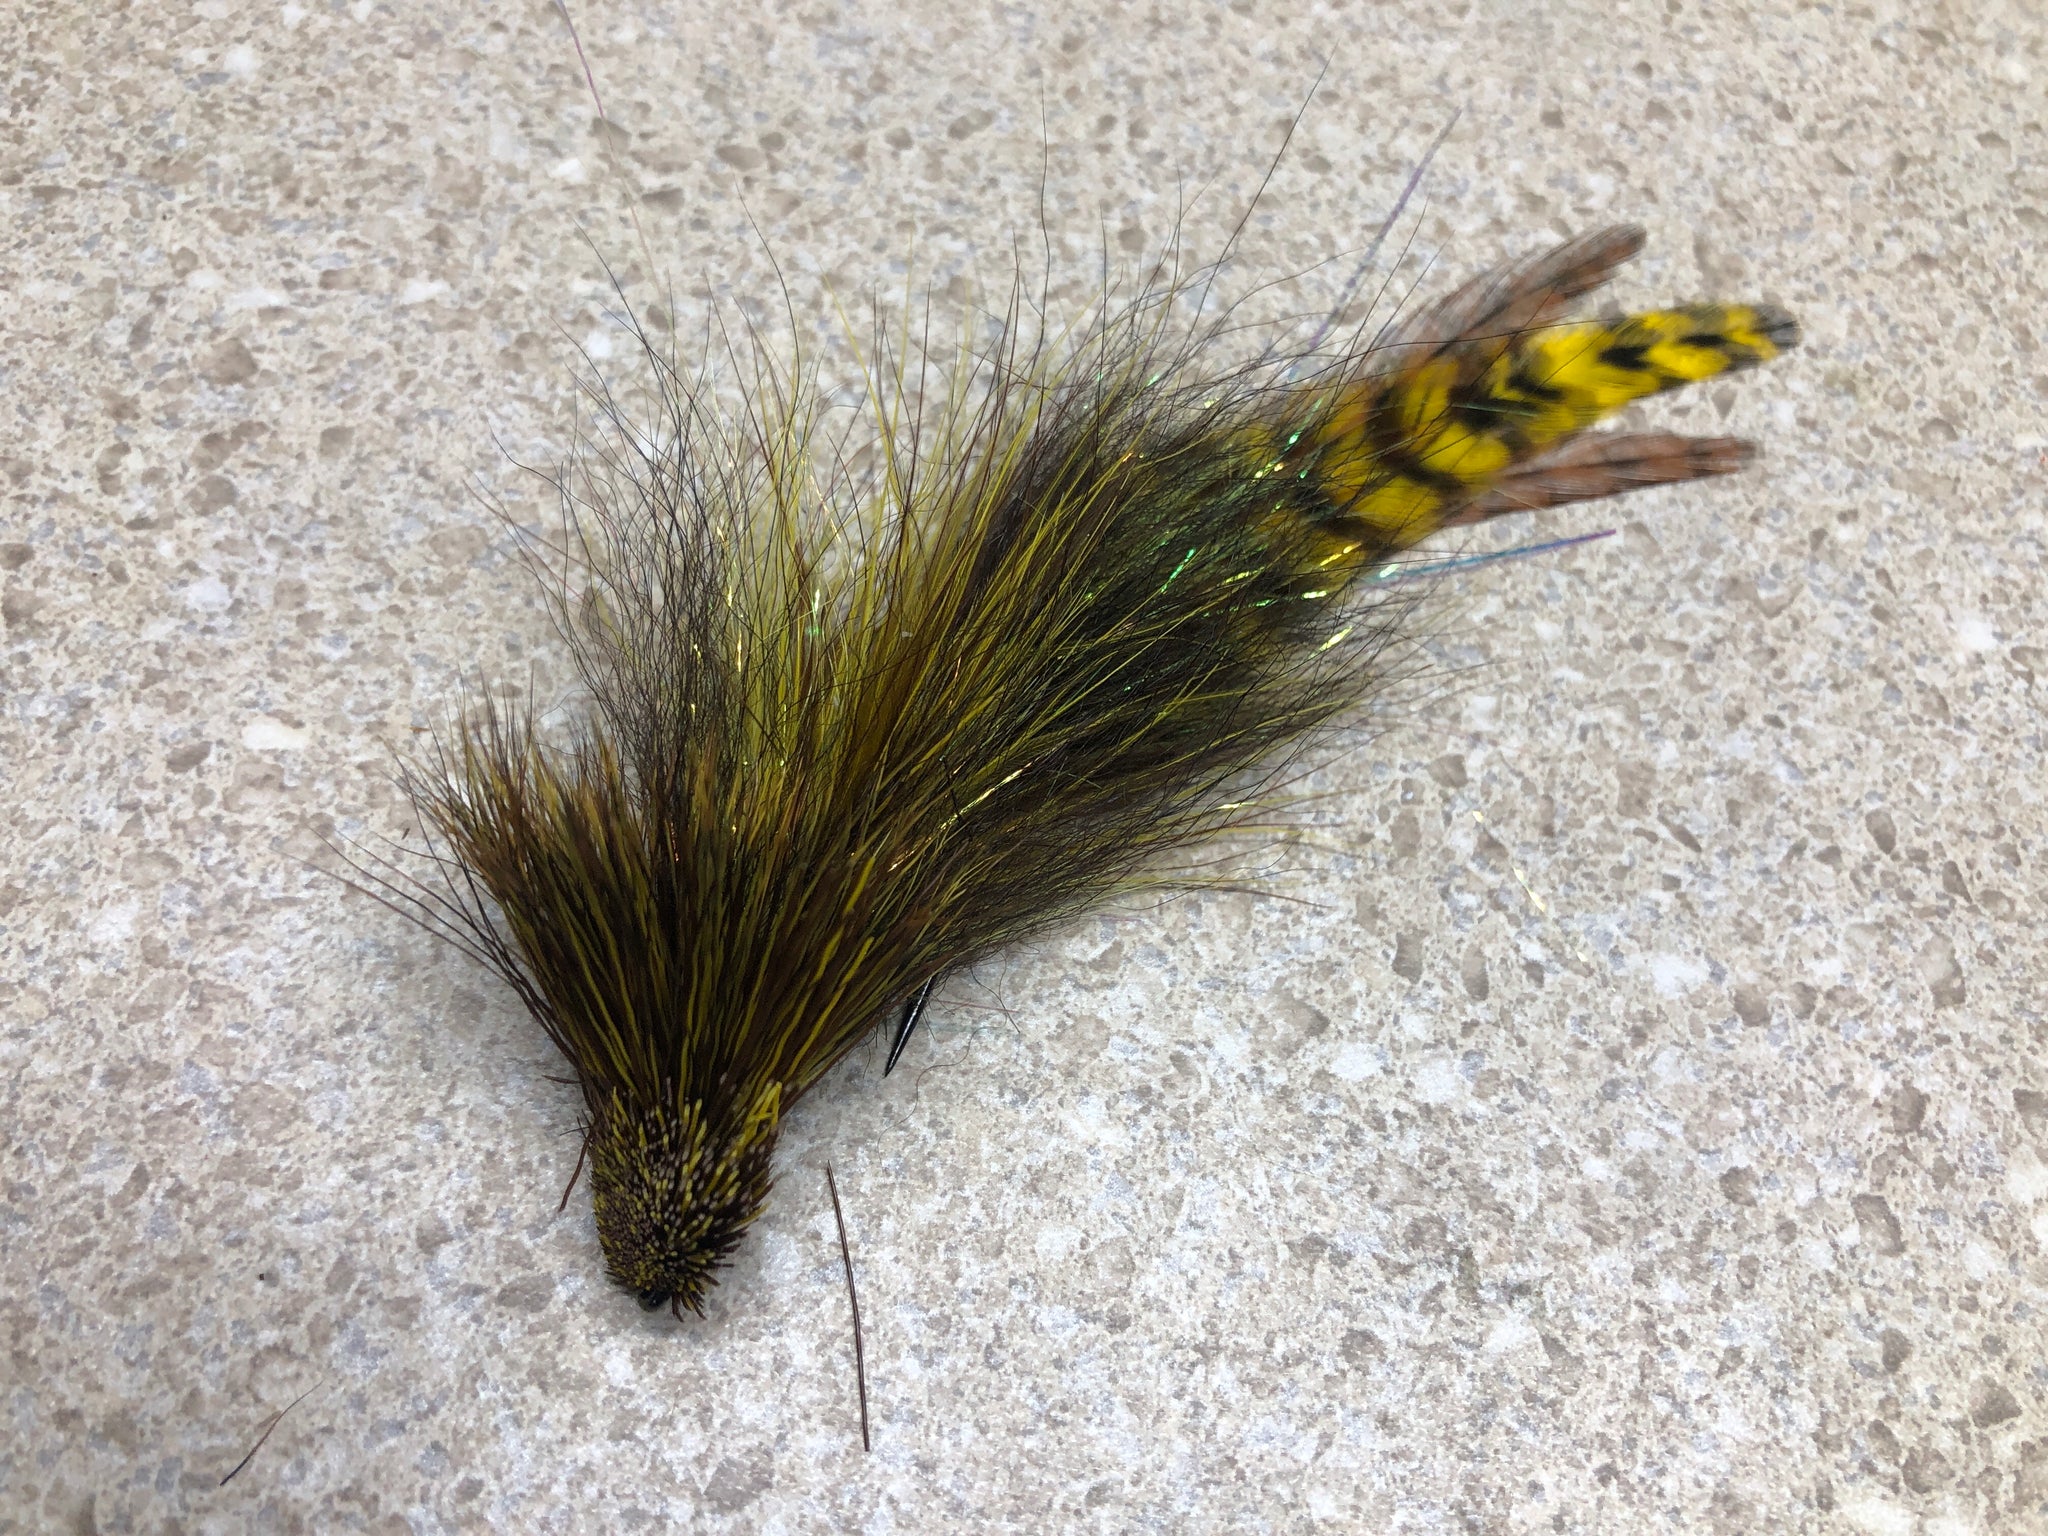 Tom Whiting Designs the Perfect Feathers for Fly Tying